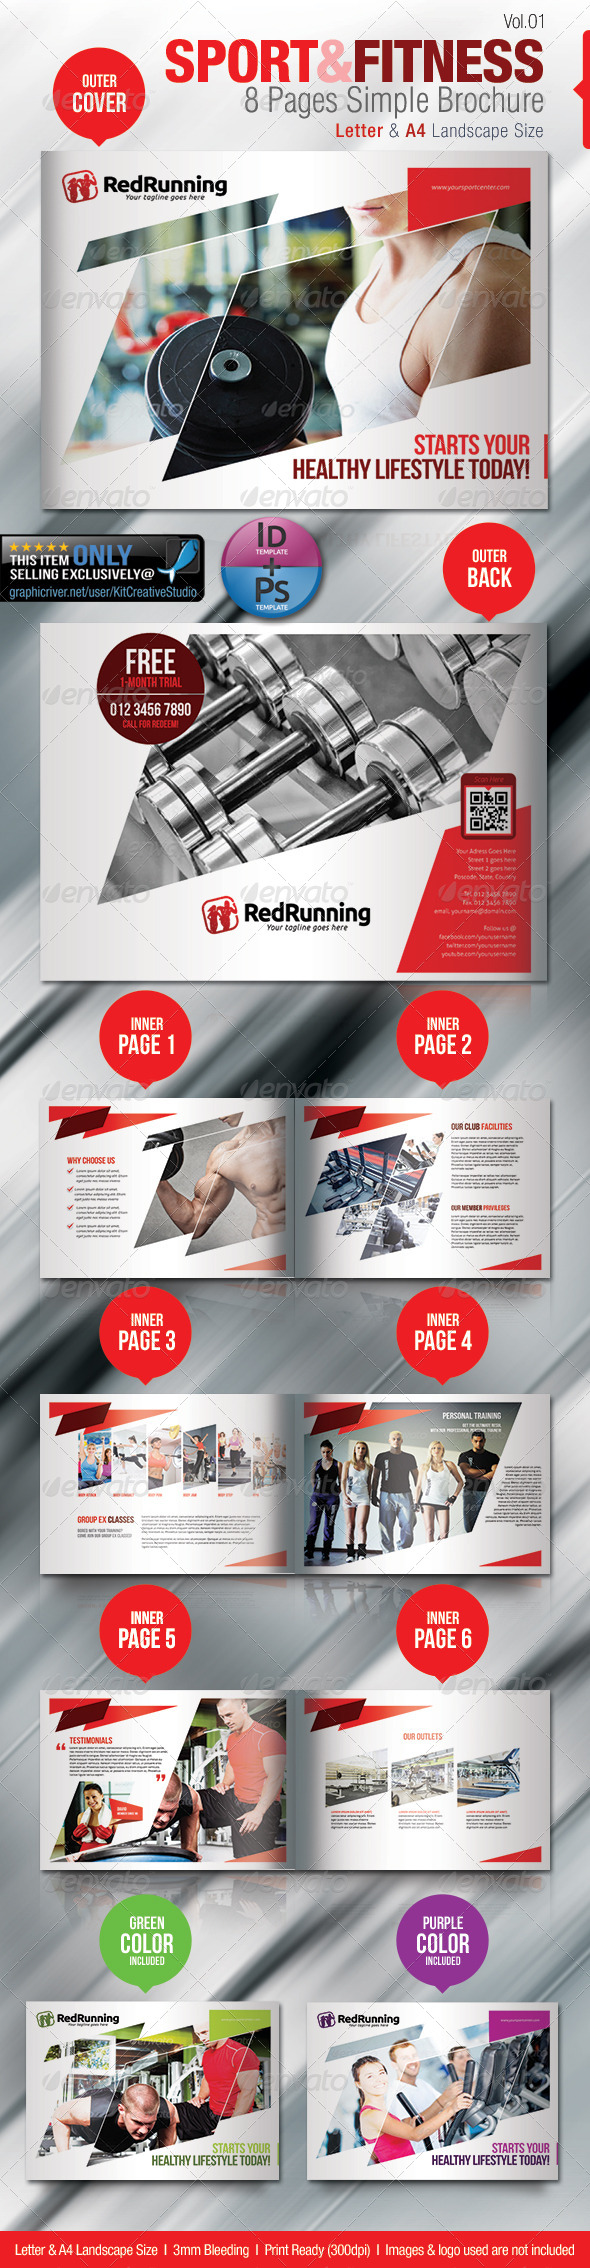 Fitness & Sport 8 Pages Simple Brochure